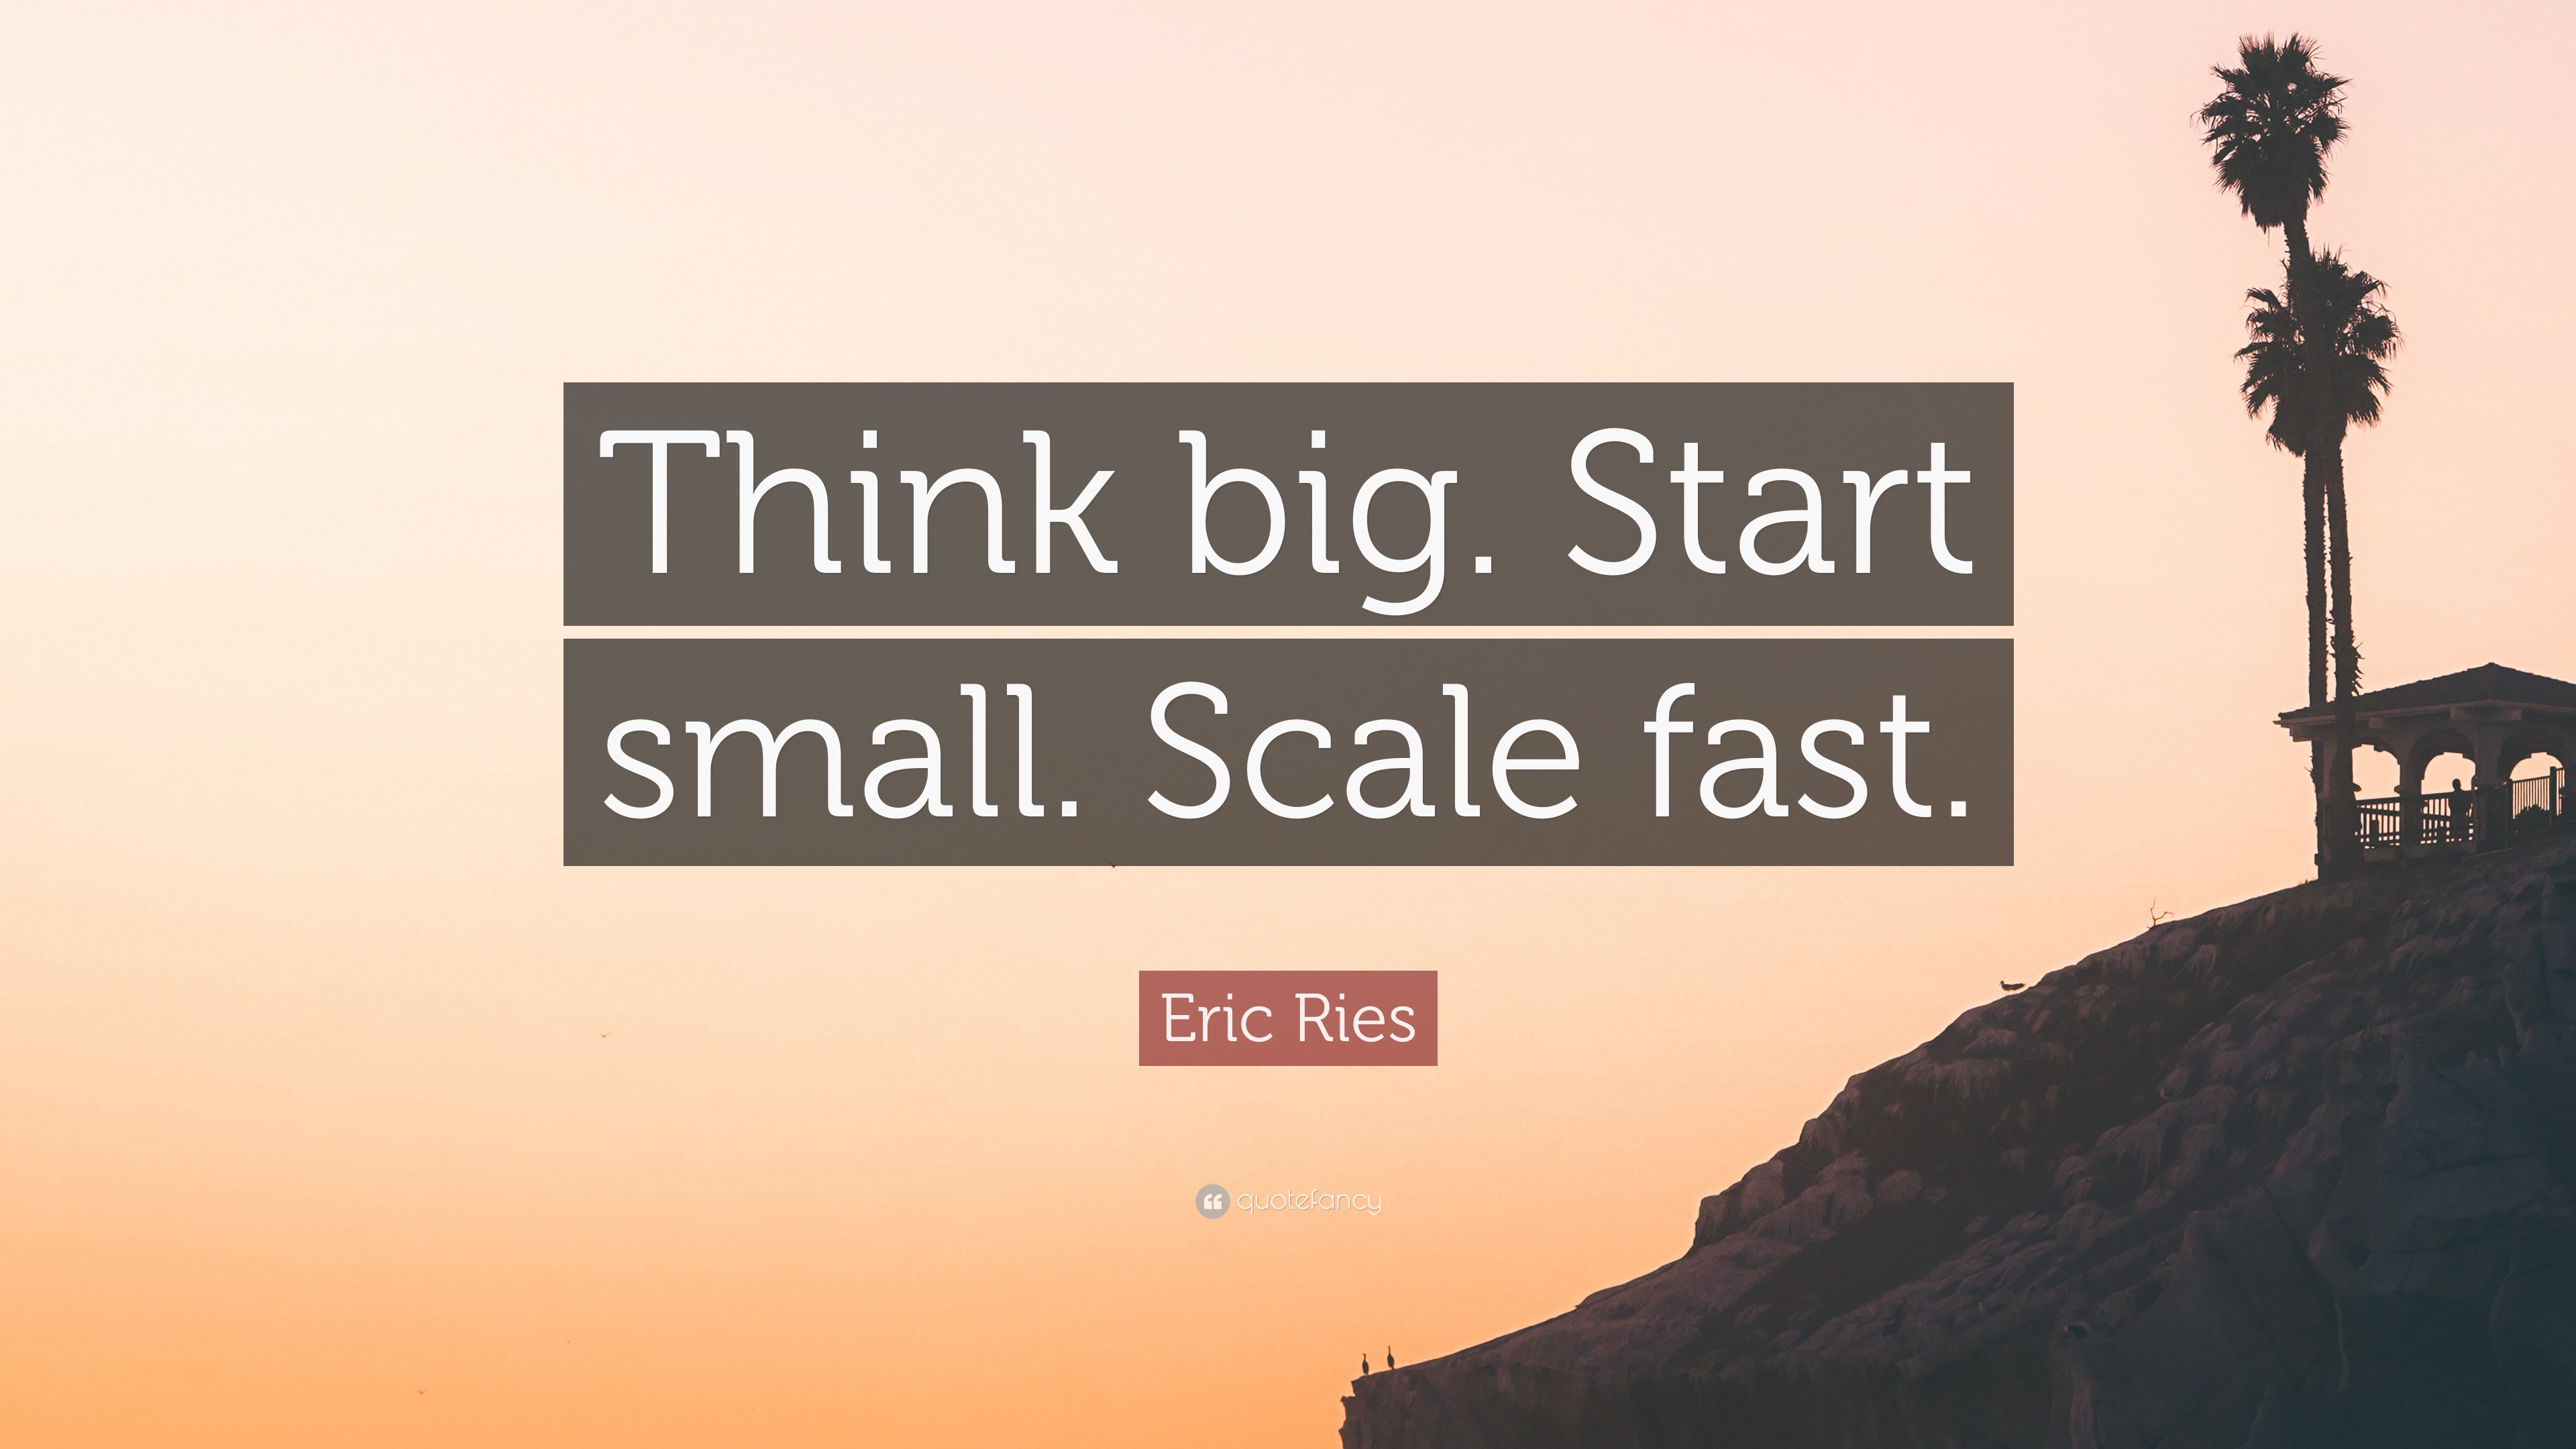 Eric Ries Quote: “Think big. Start small. Scale fast.”